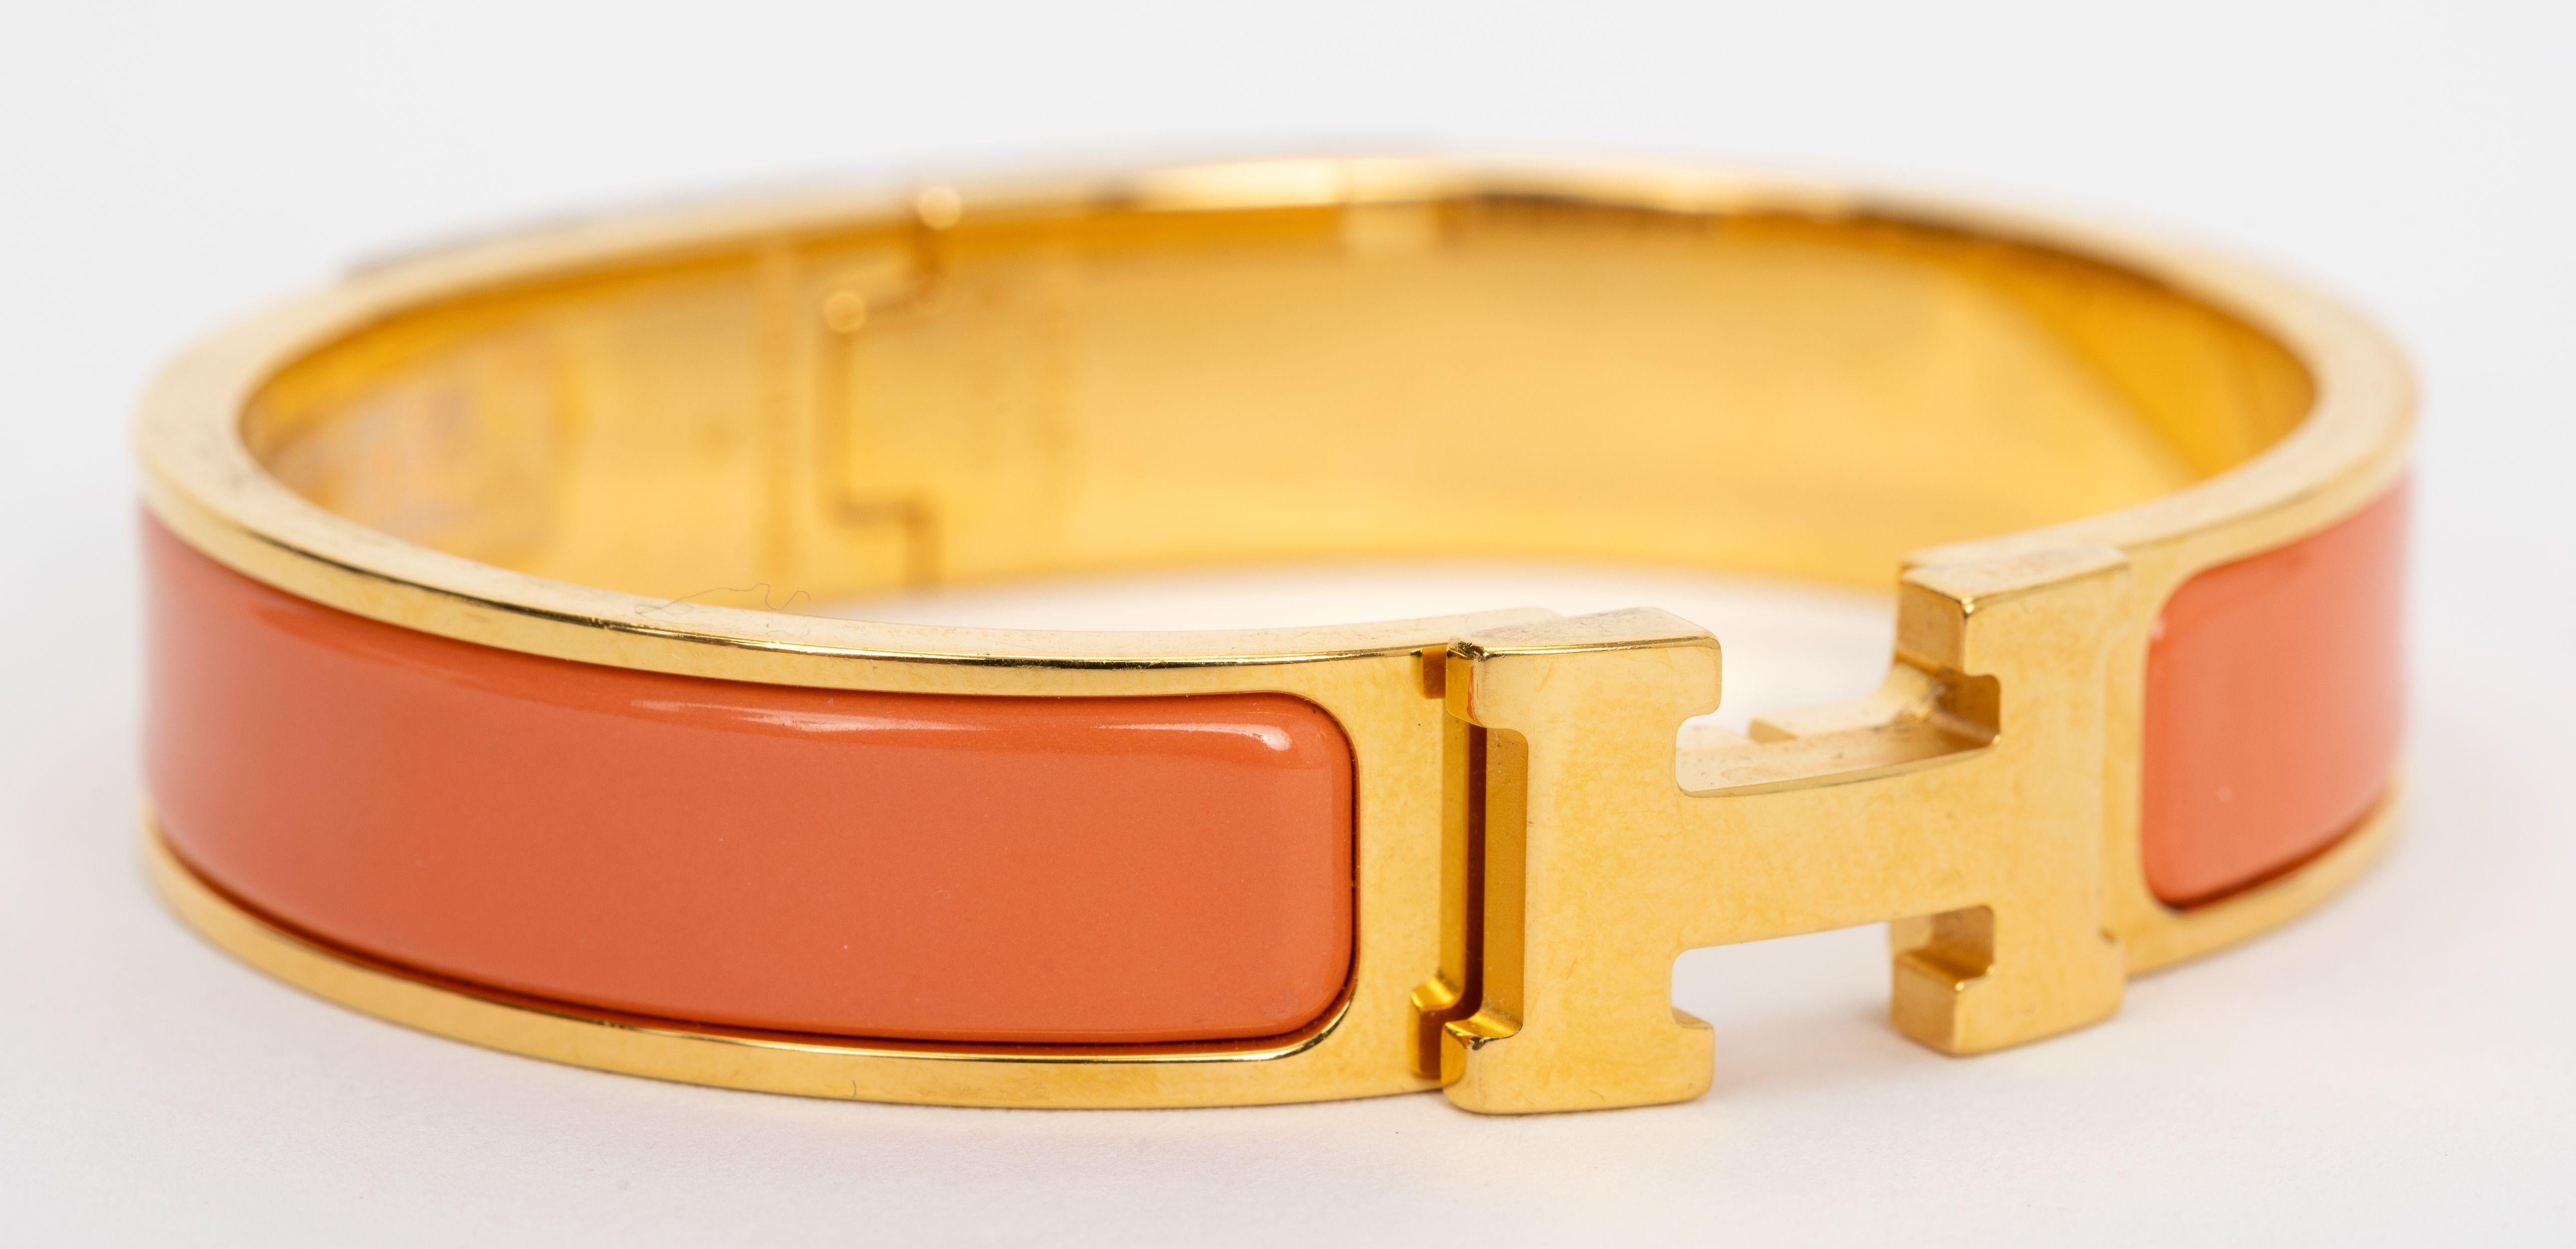 The Hermes Clic Clac H, narrow bracelet,  in peach melba enamel with gold-plated hardware.
Size PM, new in unworn condition, comes with velvet pouch.